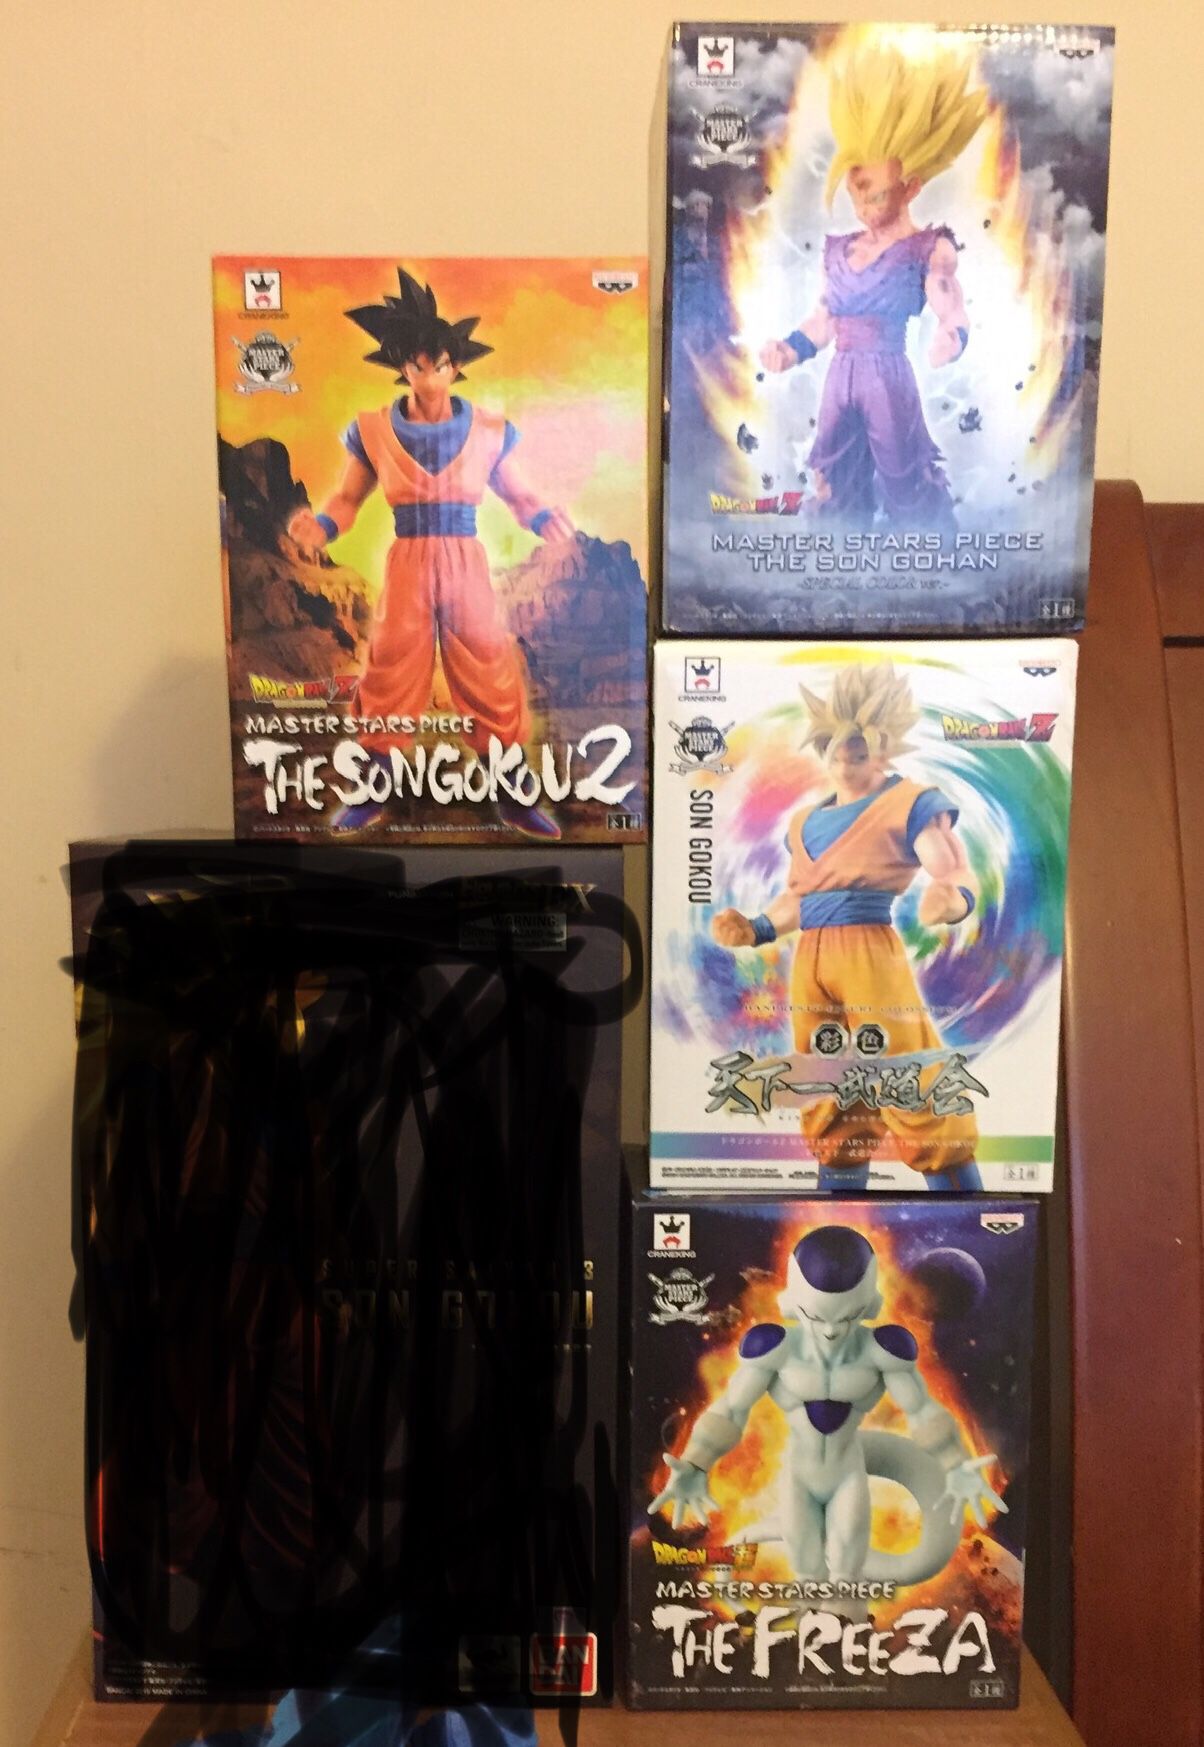 Dragon Ball Z Figures 1/6th scale Awesome Mint in Box!!!